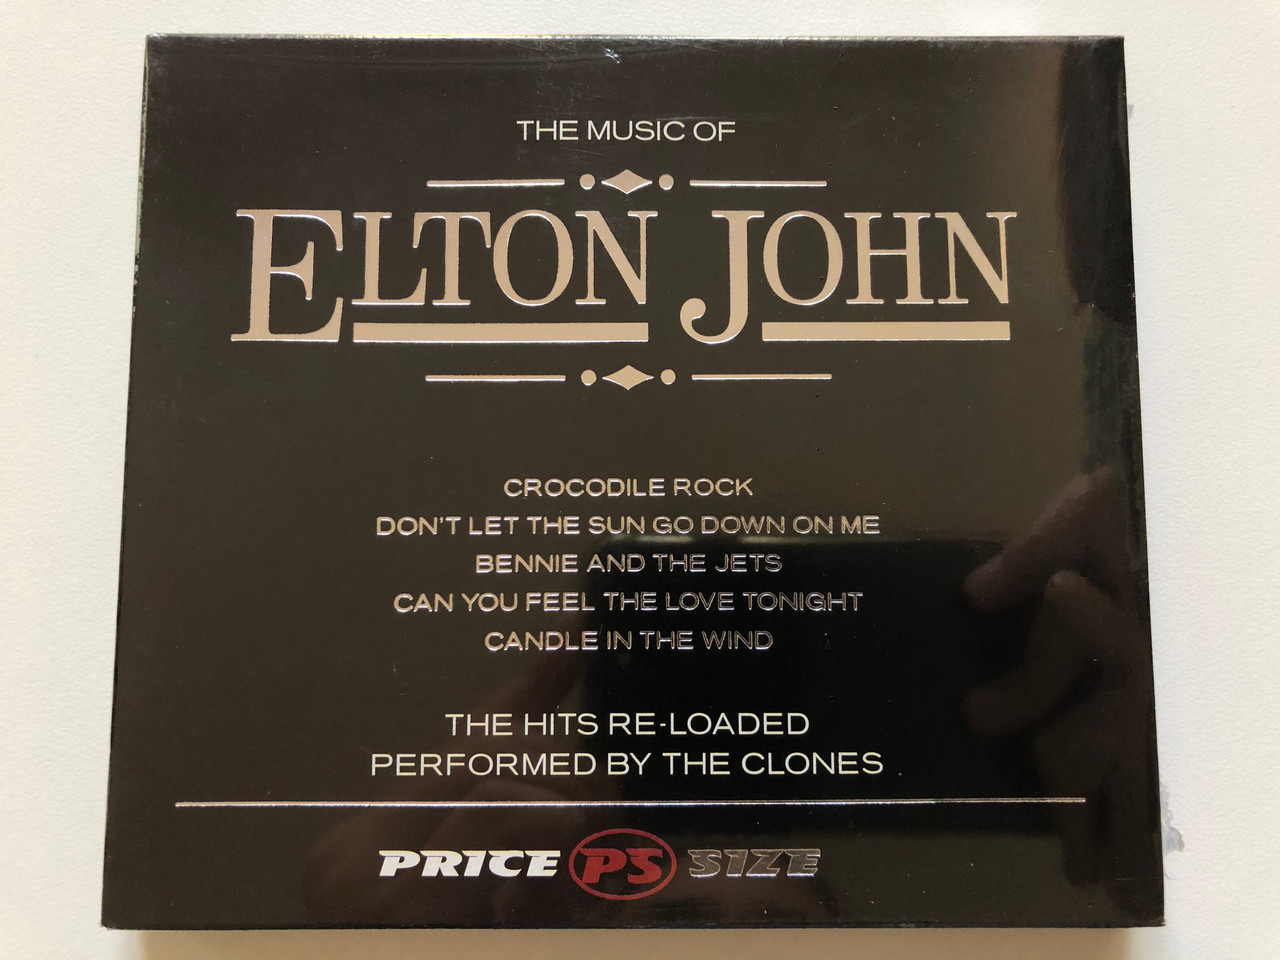 https://cdn10.bigcommerce.com/s-62bdpkt7pb/products/0/images/198040/The_Music_Of_Elton_John_Crocodile_Rock_Dont_Let_The_Sun_Go_Down_On_Me_Bennie_And_The_Jets_Can_You_Feel_The_Love_Tonight_Candle_In_The_Wind_The_Hits_Re-Loaded_Performed_by_The_Clones_1__59502.1635926725.1280.1280.JPG?c=2&_gl=1*rmbe7e*_ga*MjA2NTIxMjE2MC4xNTkwNTEyNTMy*_ga_WS2VZYPC6G*MTYzNTkyMjI4Mi4xNTMuMS4xNjM1OTI3MDAwLjYw